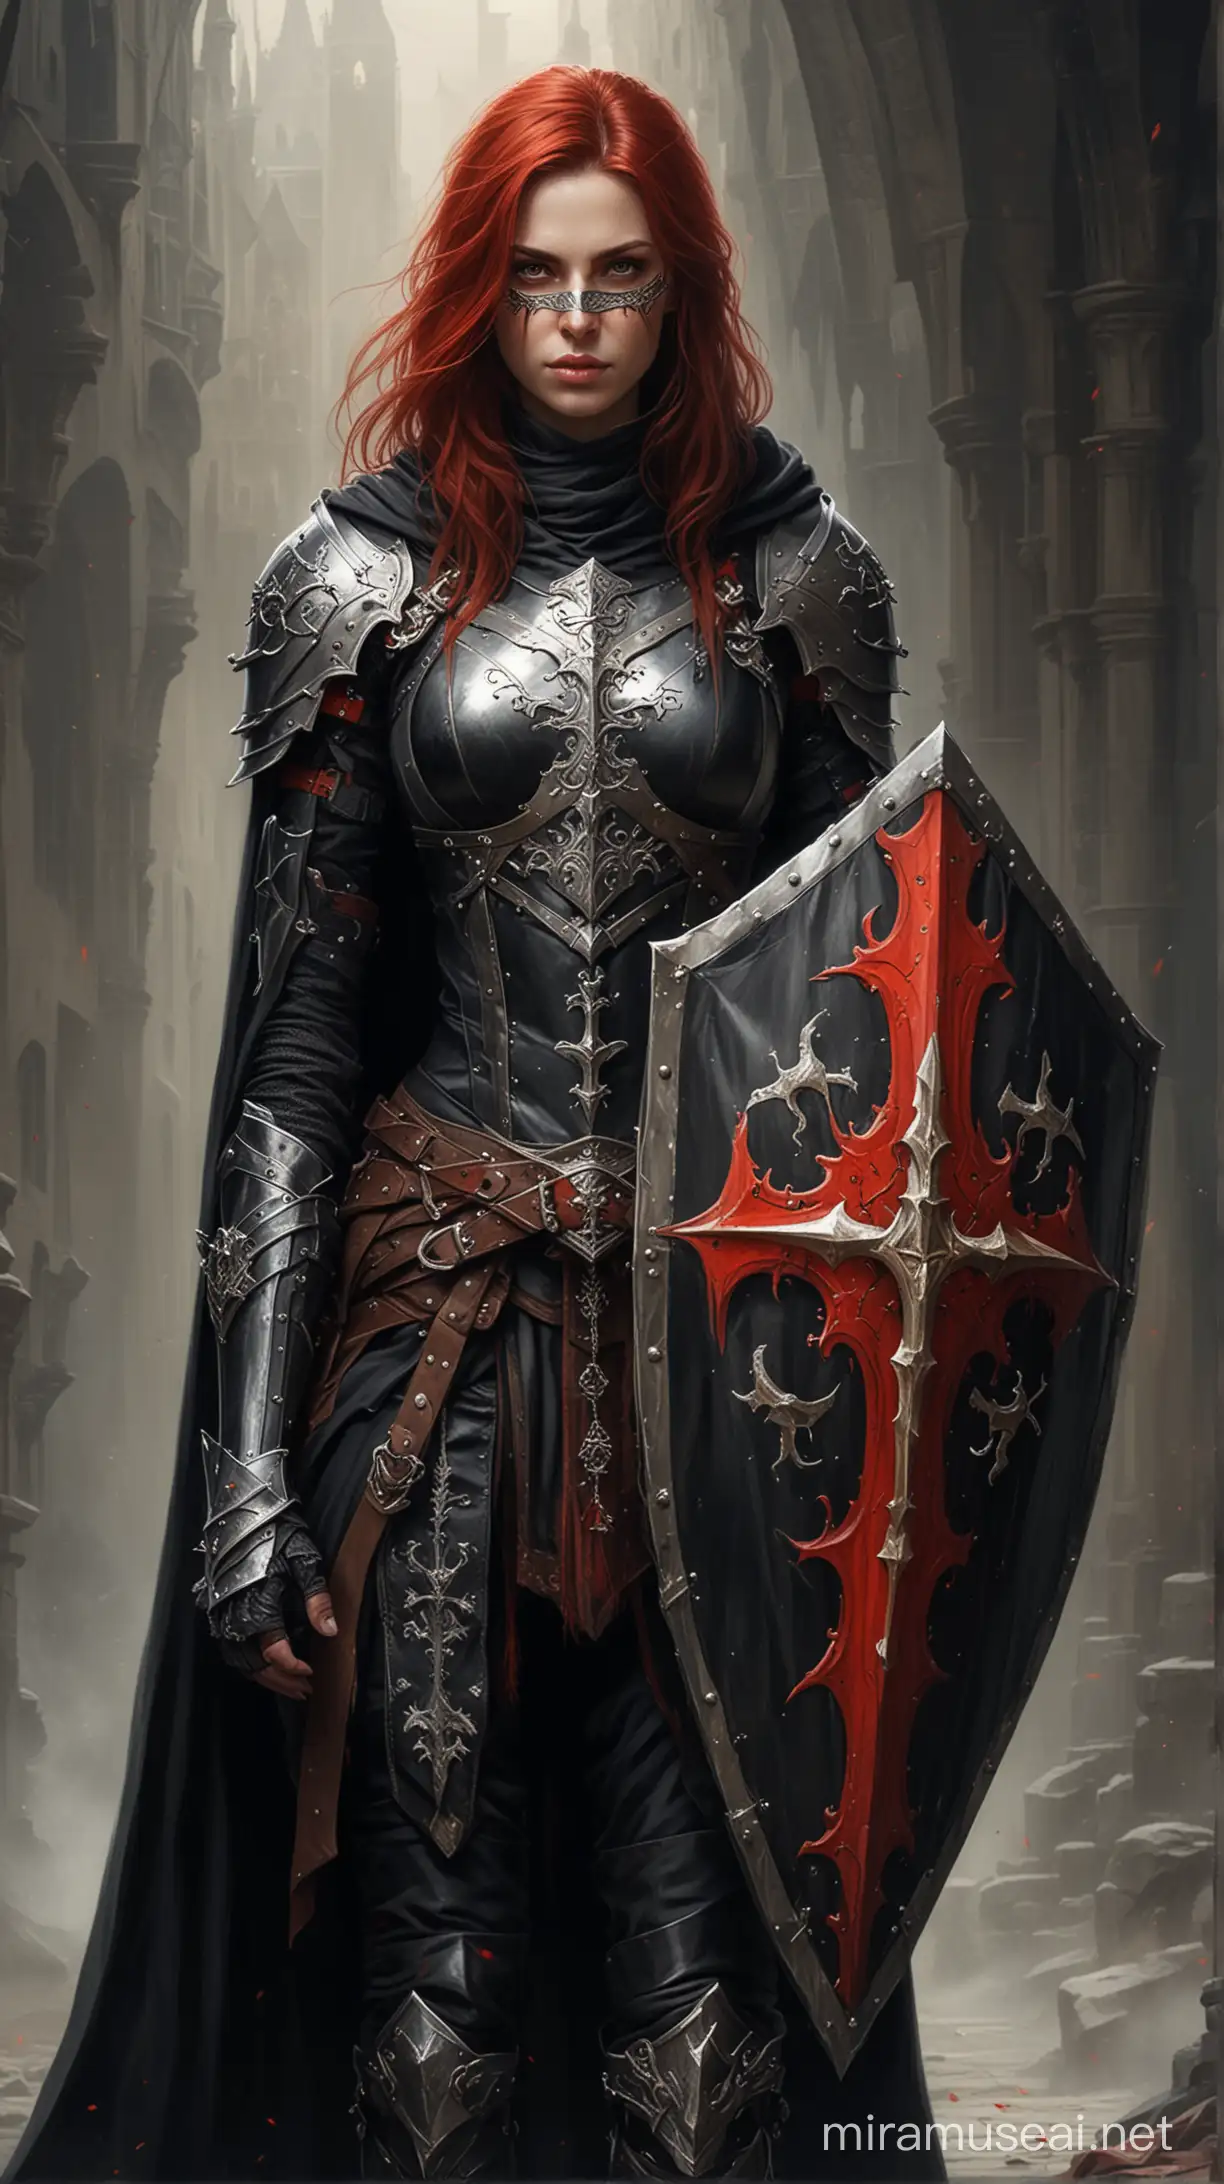 Epic Fantasy Medieval Knight with Swords and Shield under Inquisition Banner